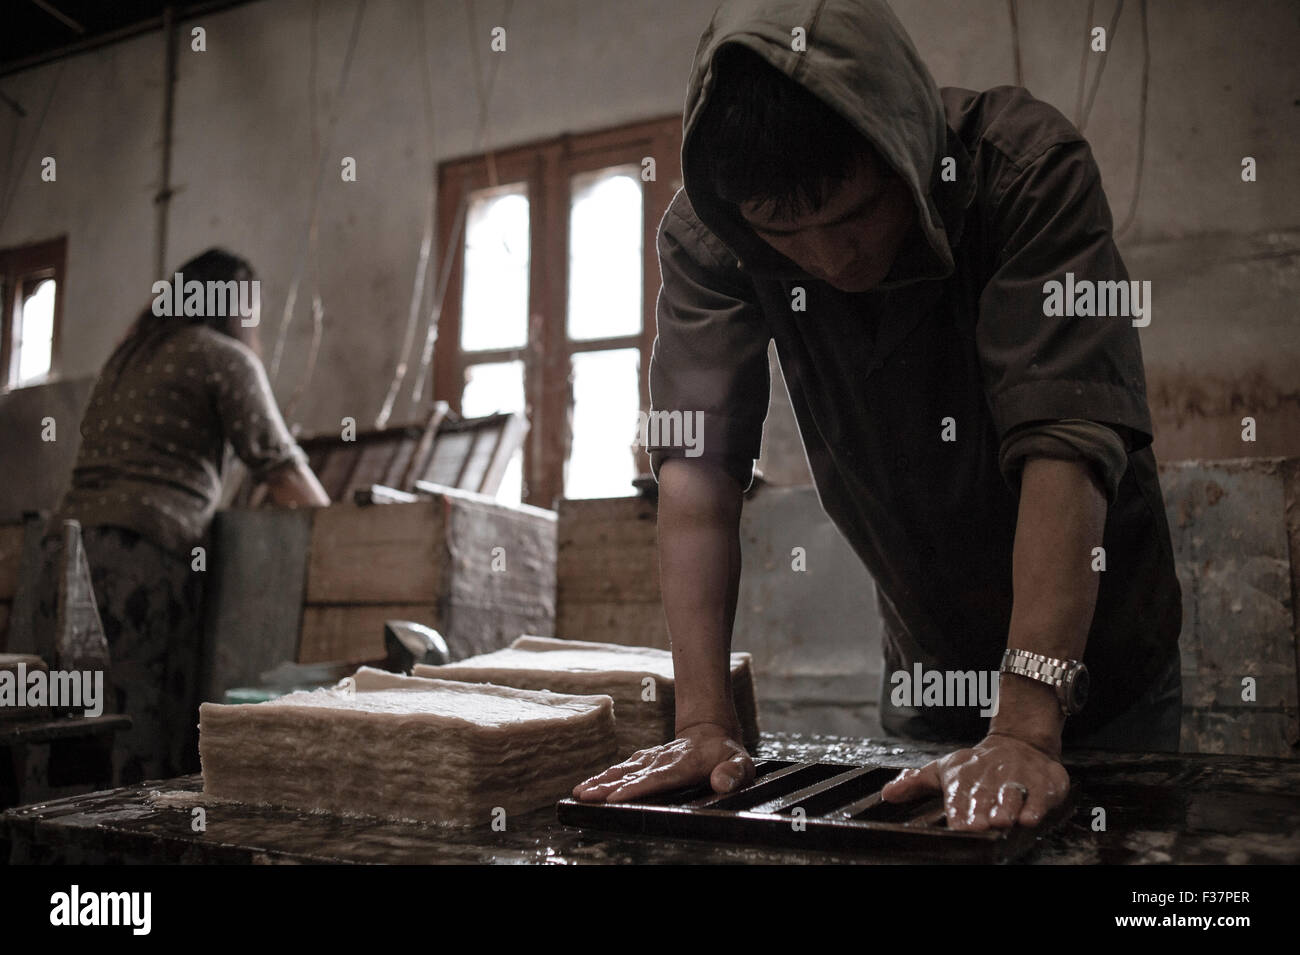 Jungshi Paper Factory, Thimphu, Bhutan. A man compresses handmade paper during the paper production process. The paper is purely handmade so sells at Stock Photo